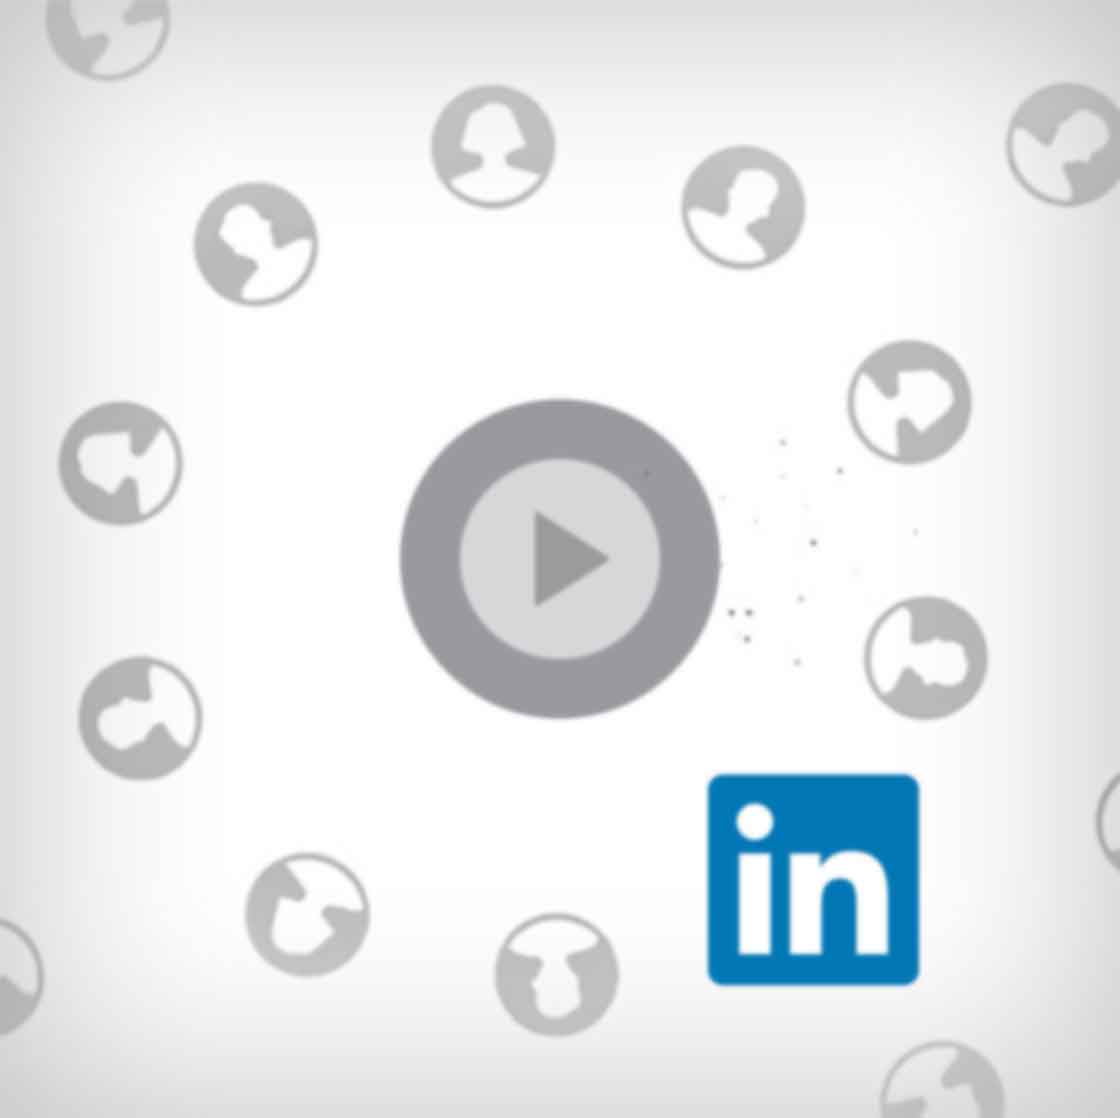 Content for publishers, Linkedin